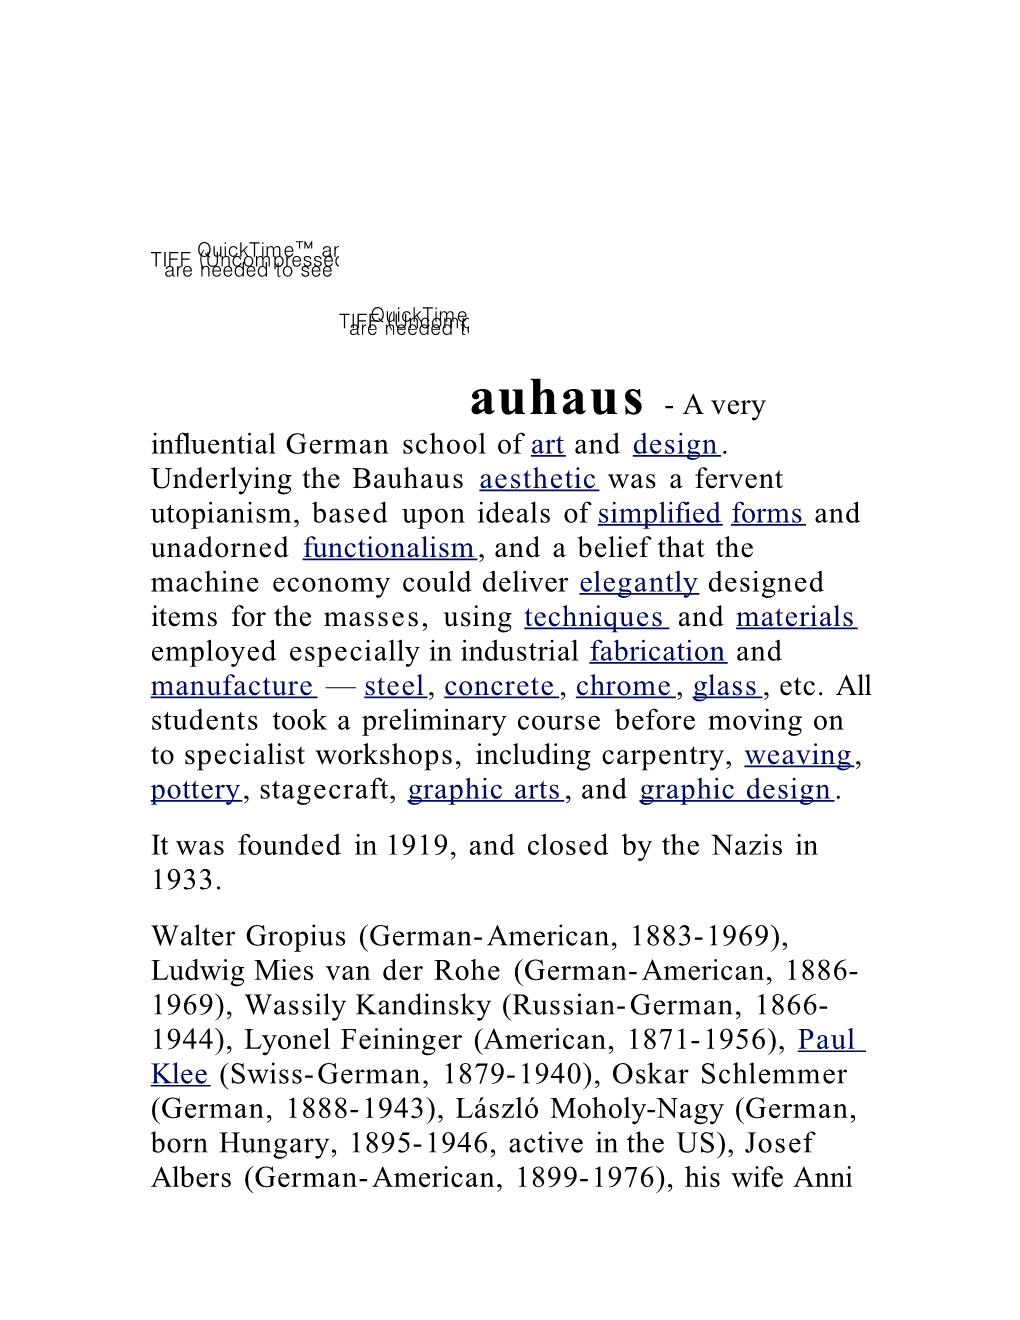 Auhaus - a Very Influential German School of Art and Design